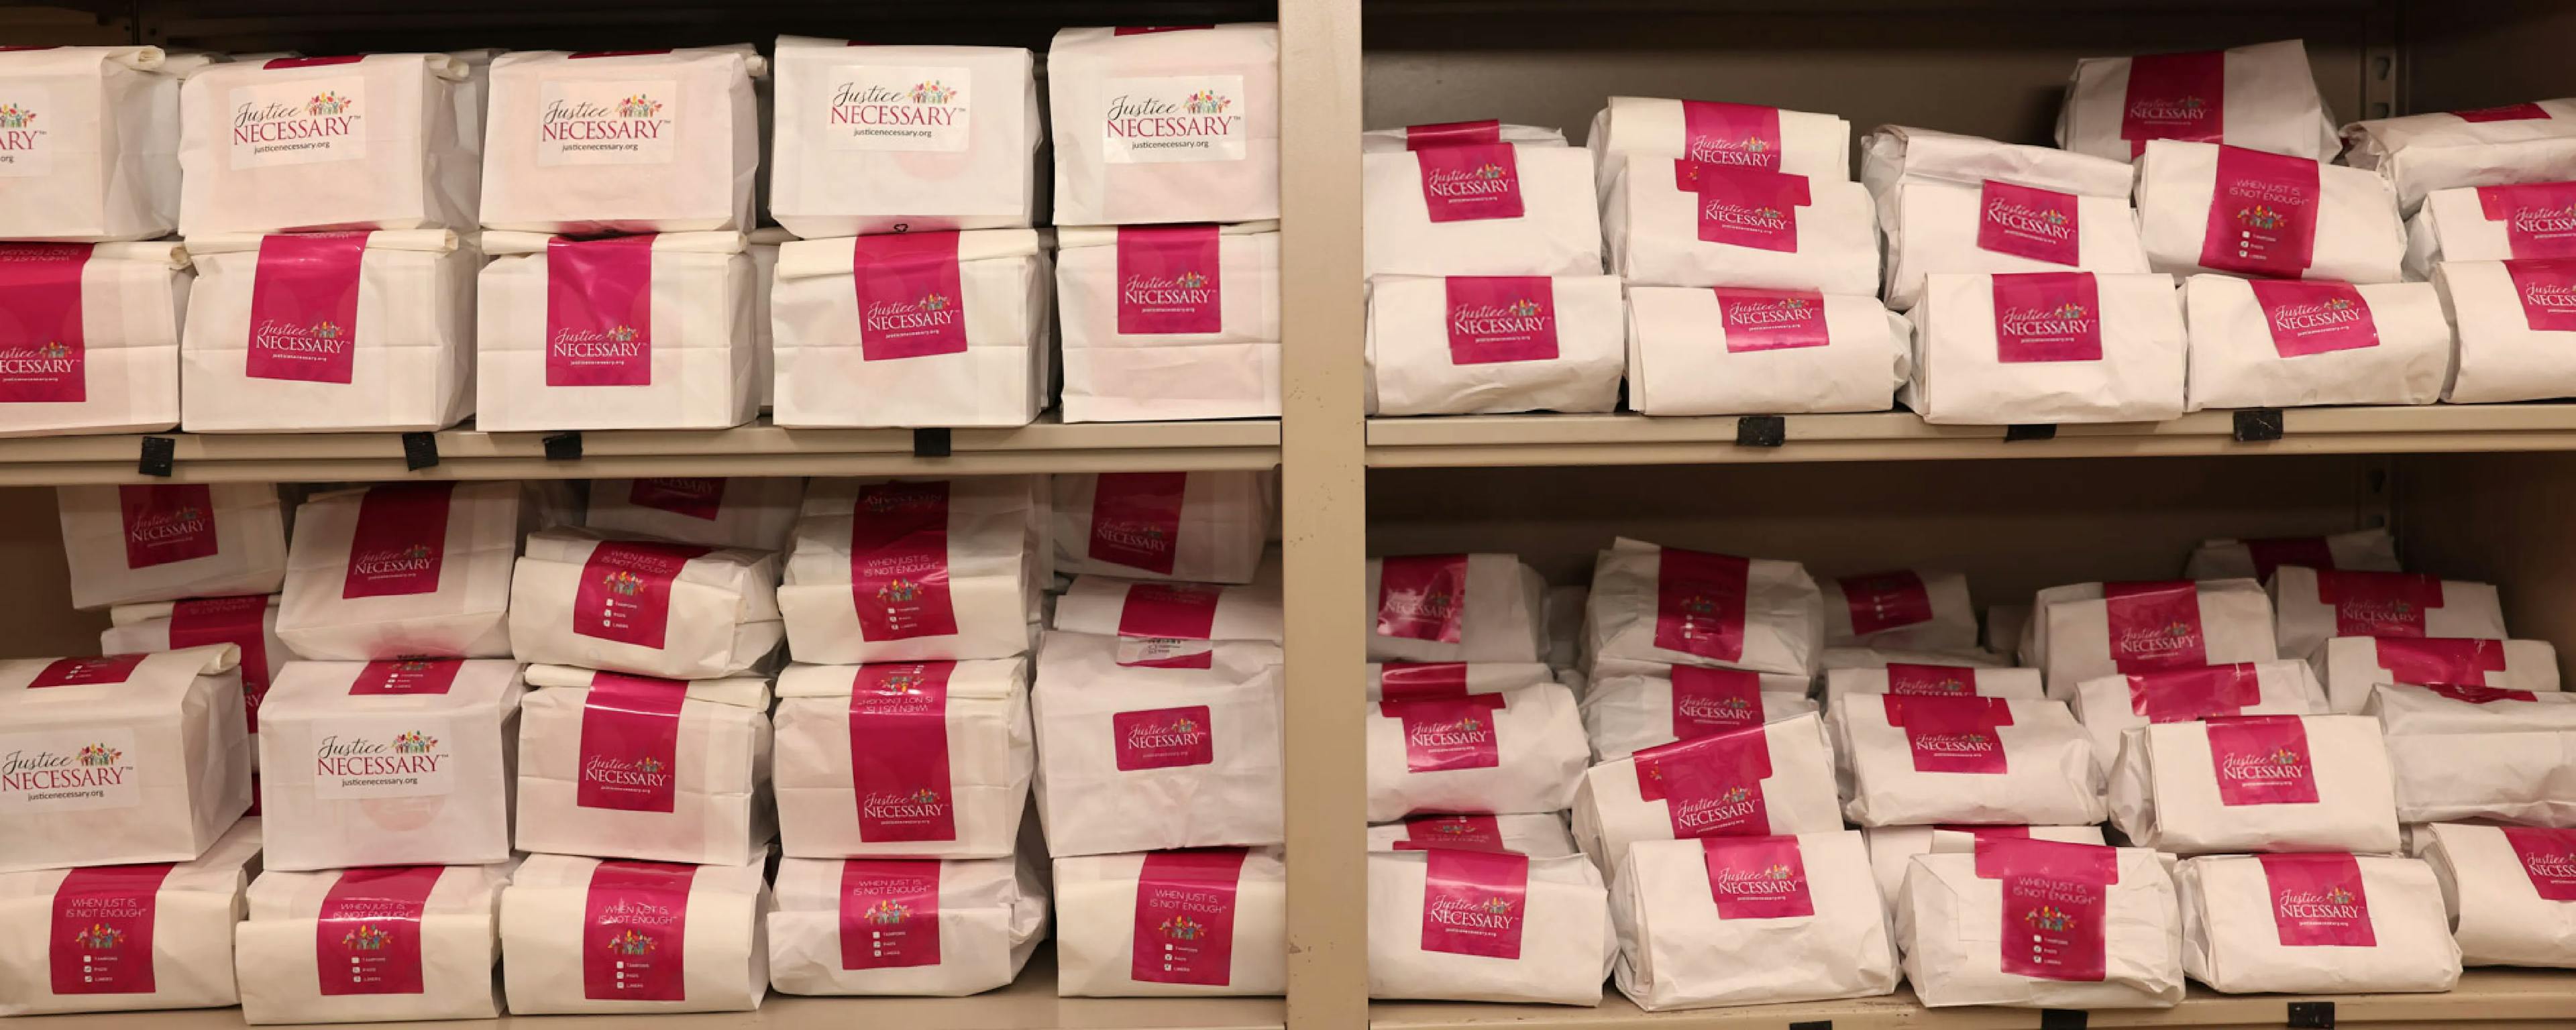 Shelves of menstrual products